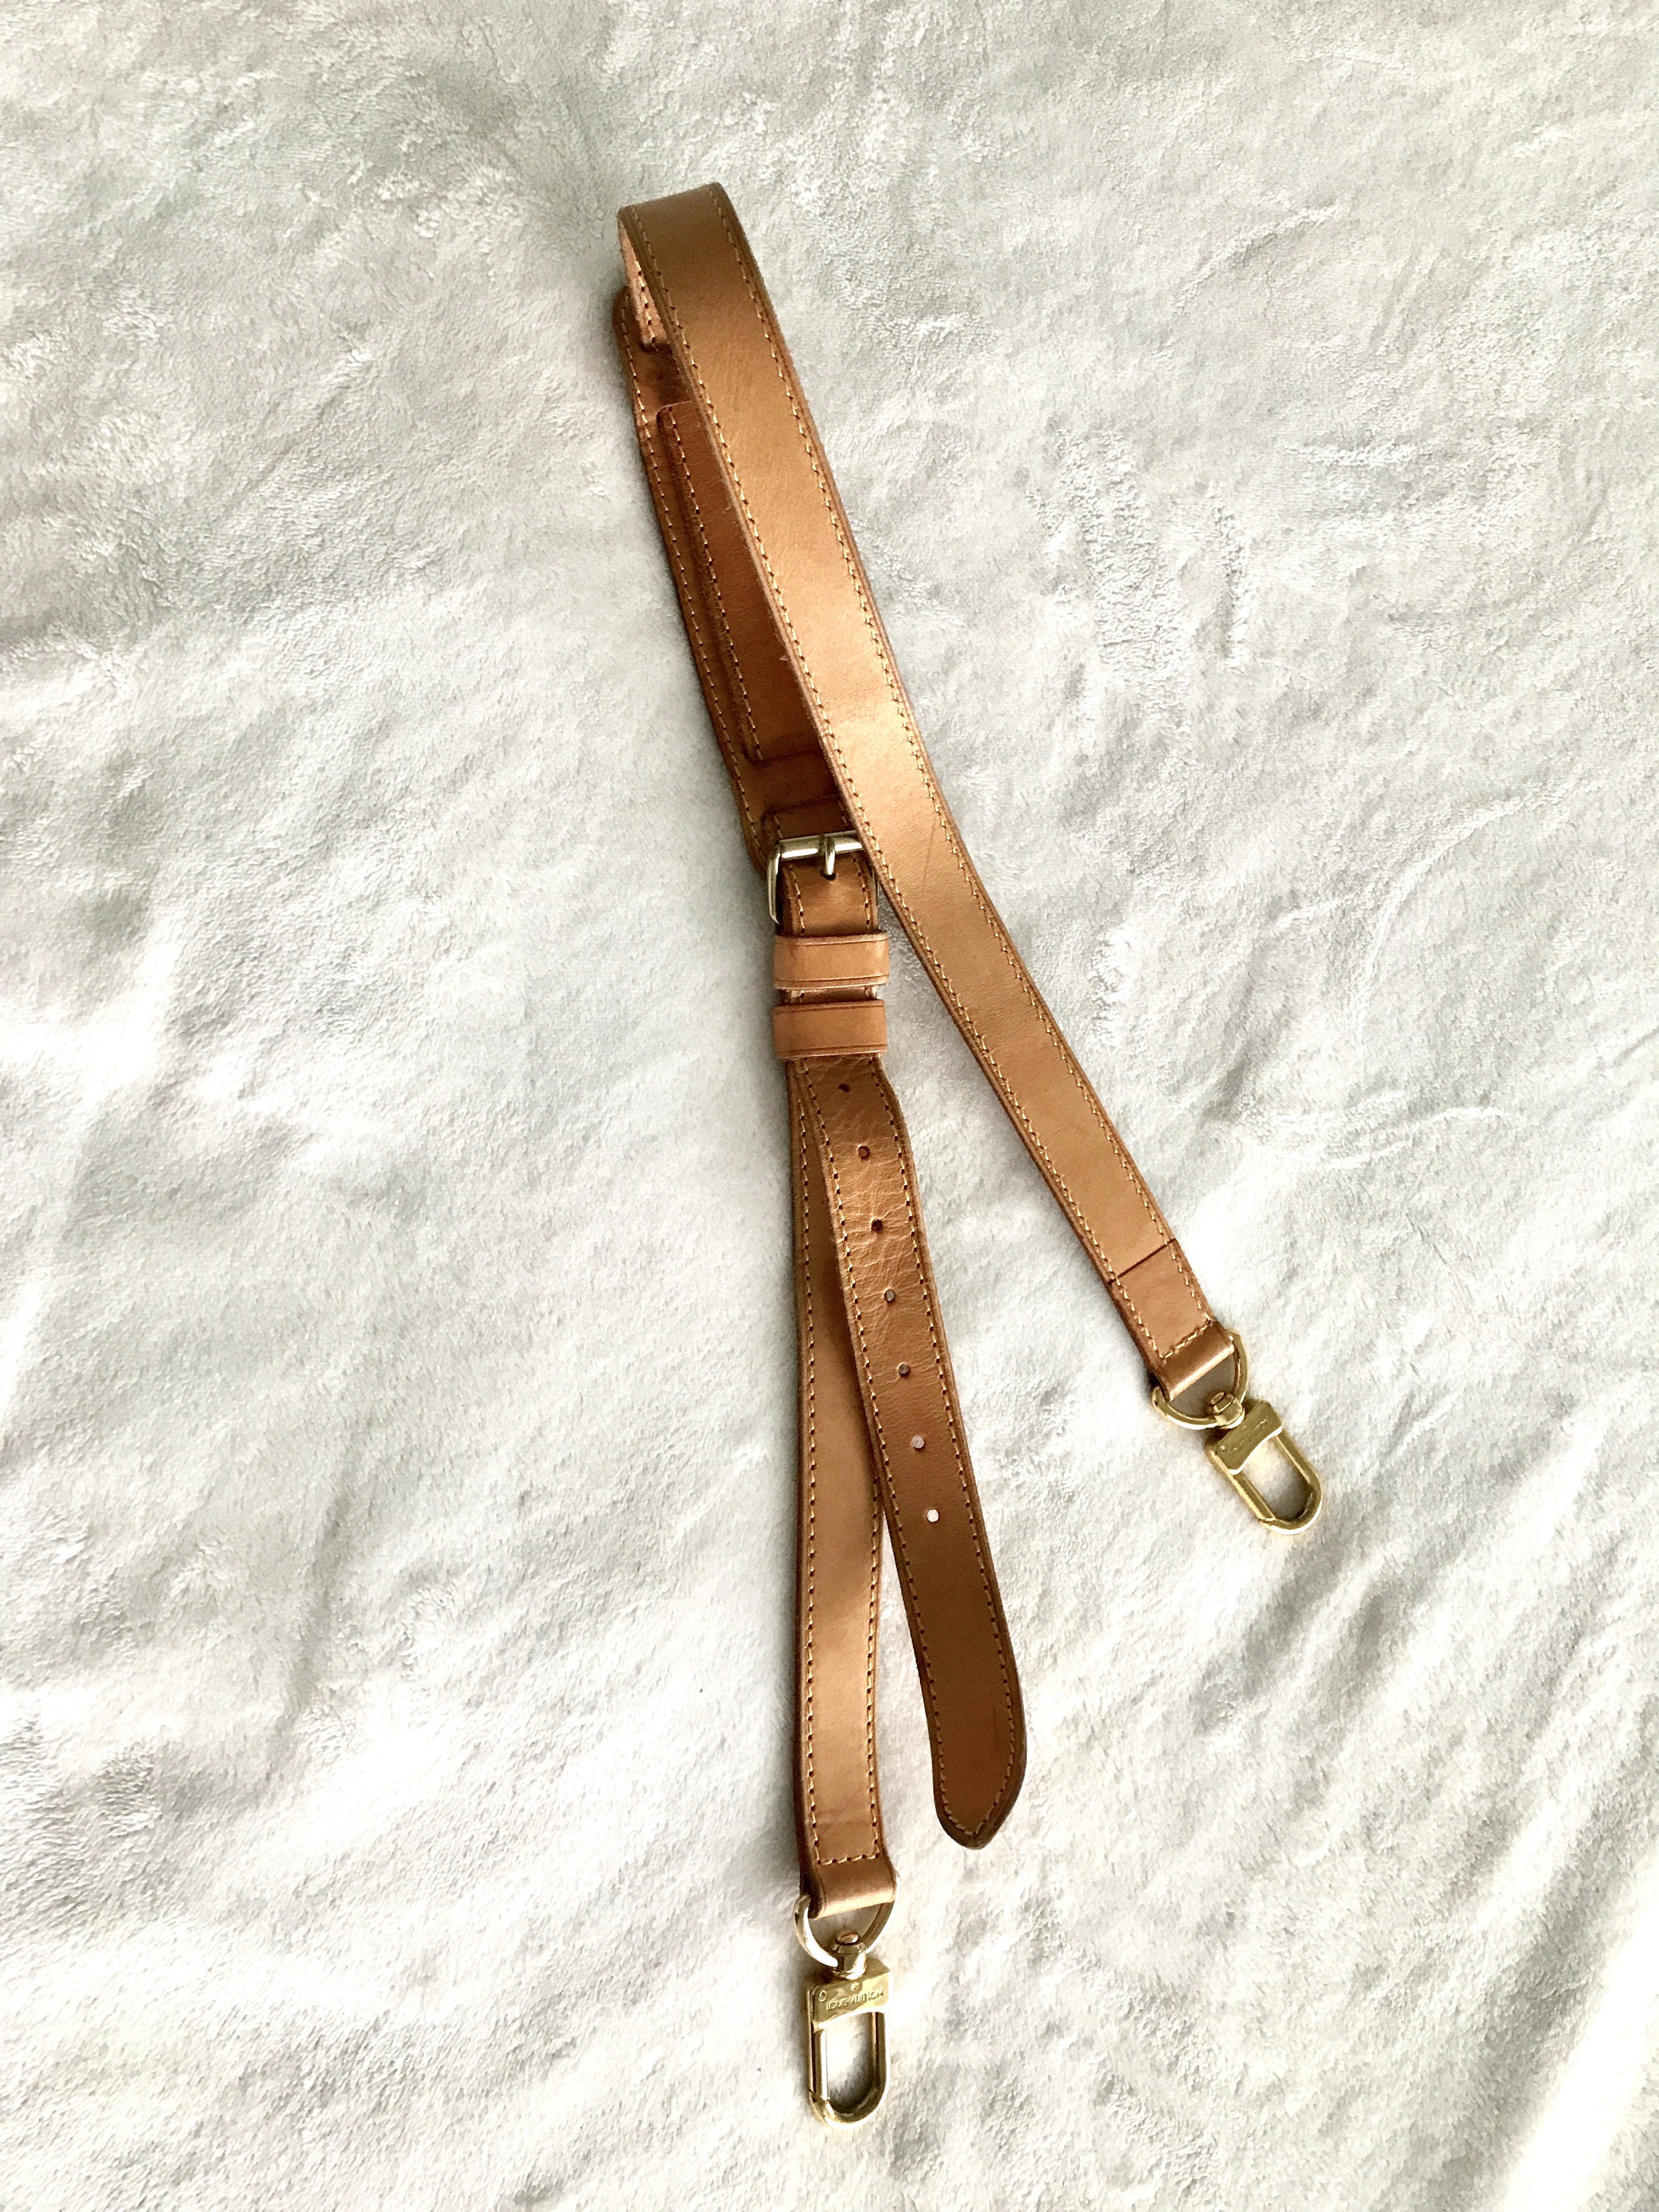 Louis Vuitton Adjustable Leather Shoulder Strap for Keepall